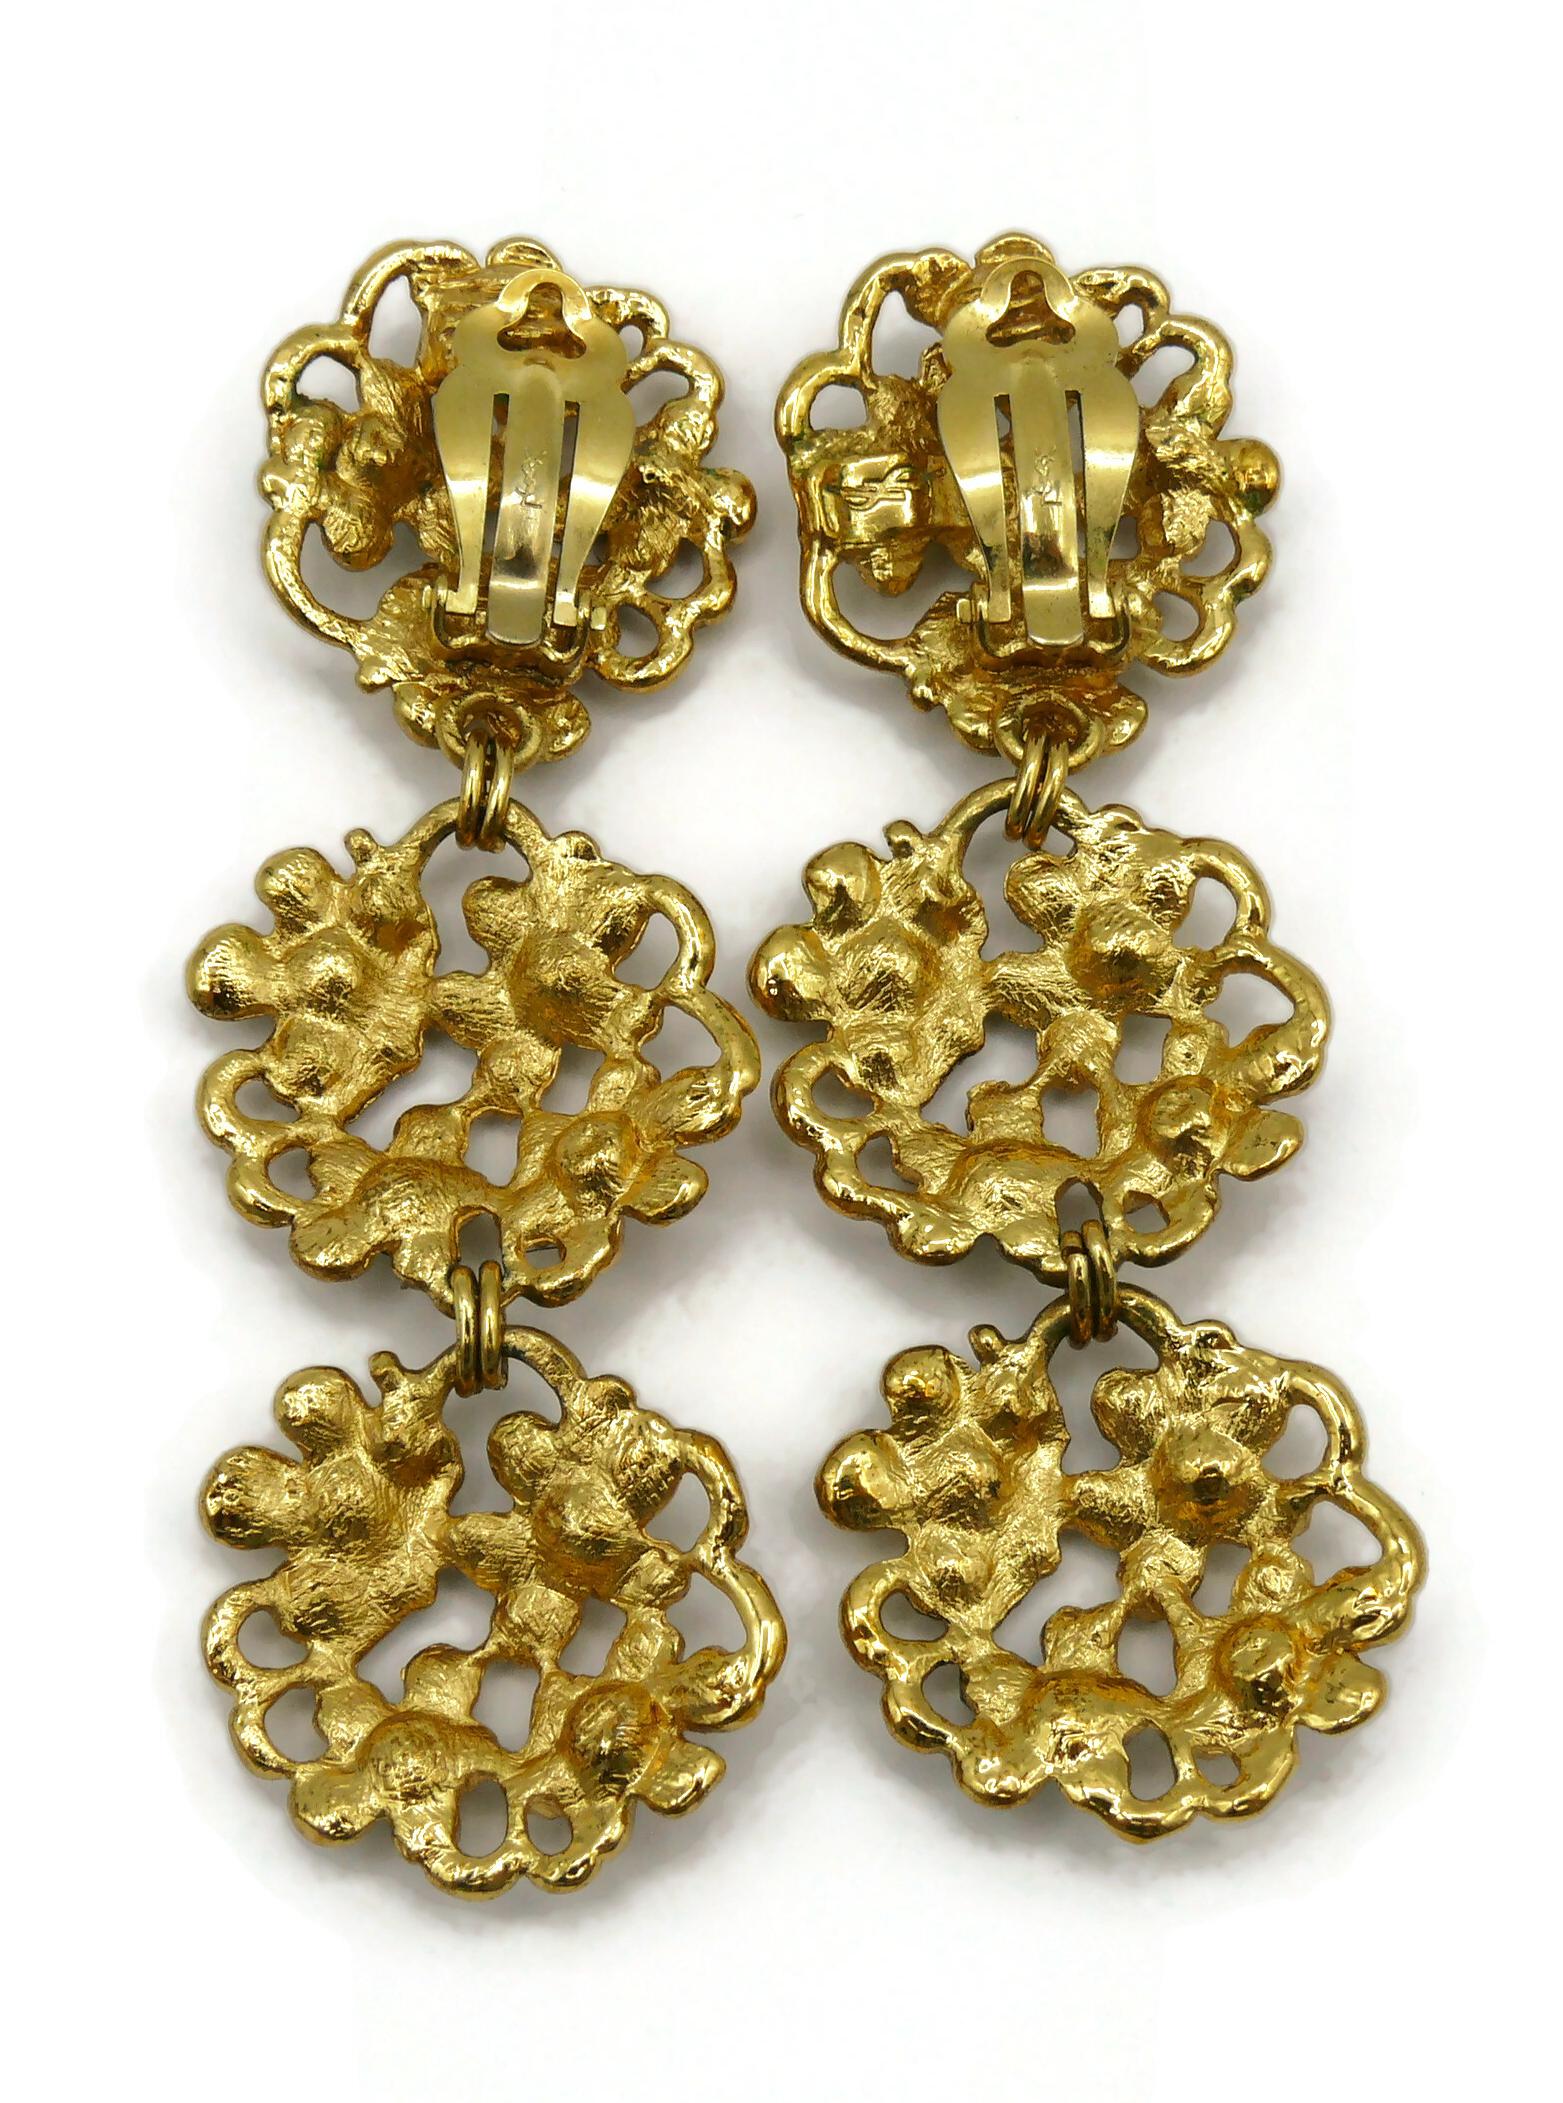 YVES SAINT LAURENT YSL Vintage Jewelled Gold Tone Floral Dangling Earrings For Sale 3